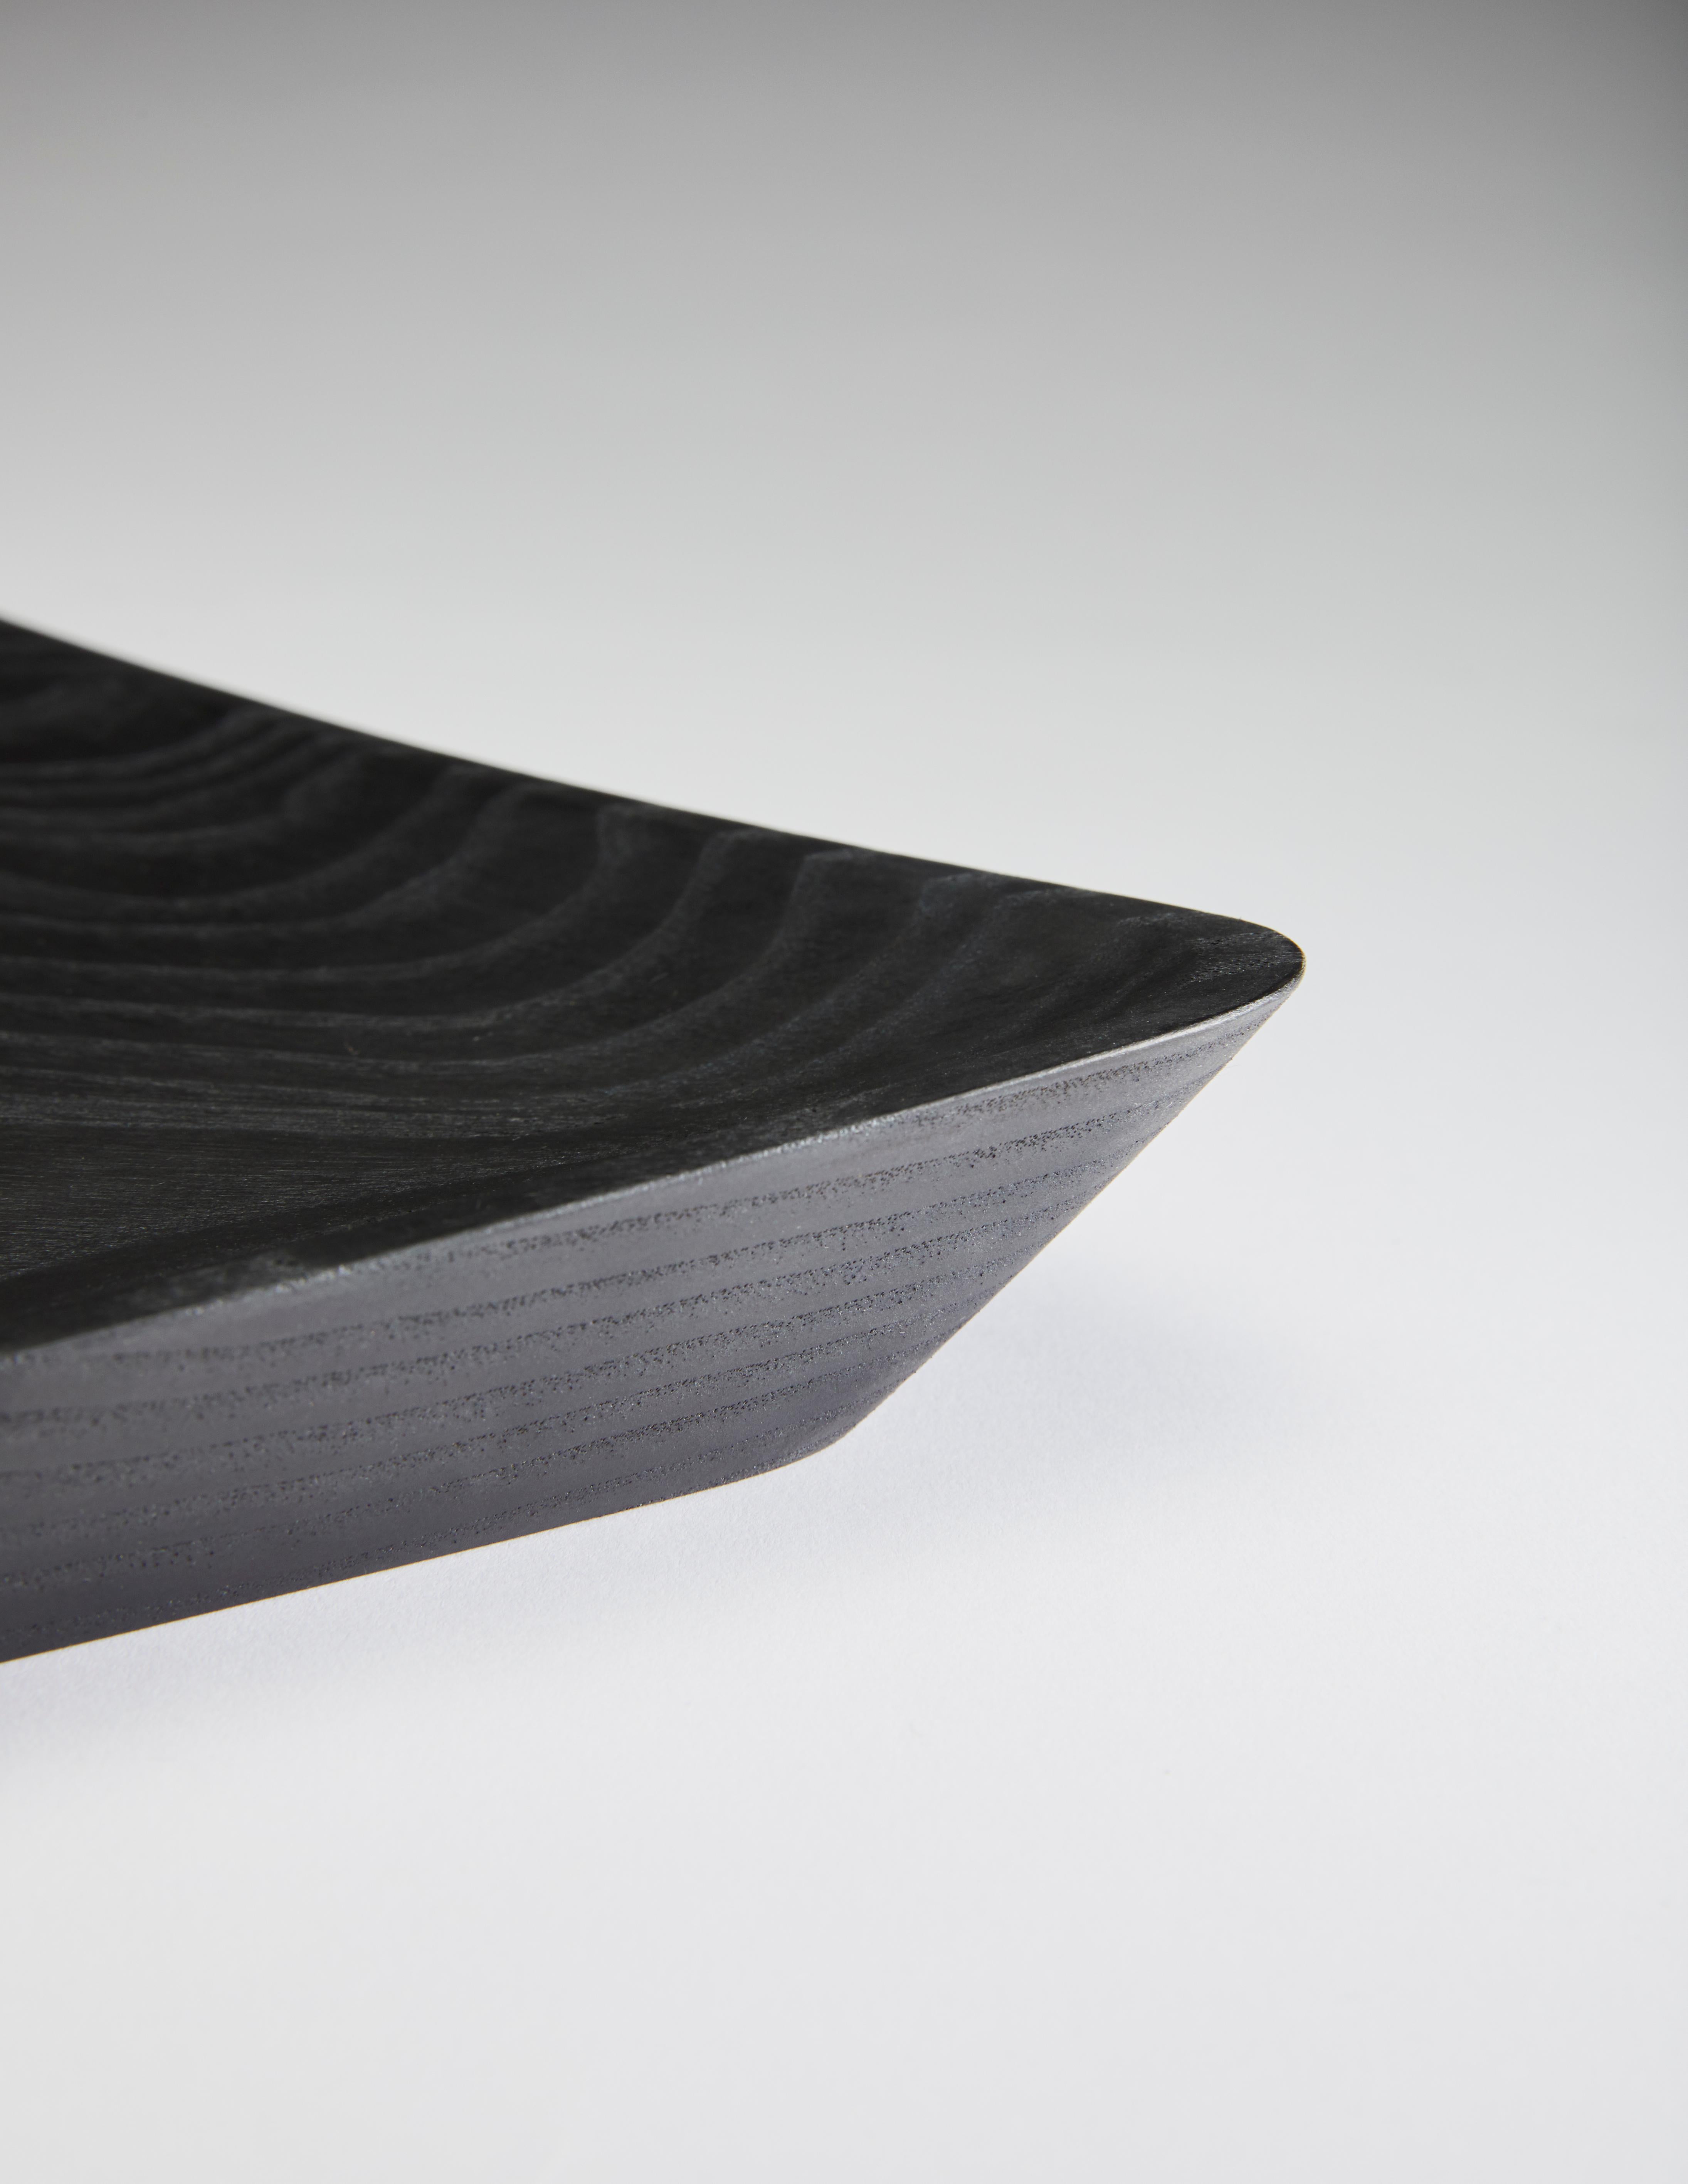 Large Creux tray by Clemence Birot
Dimensions: 33 x 32 cm
Materials: Ash (black stained).

Clemence Birot started her career in Copenhagen, Denmark, and discovered a design practice closely related to craftsmanship. The latter plays an